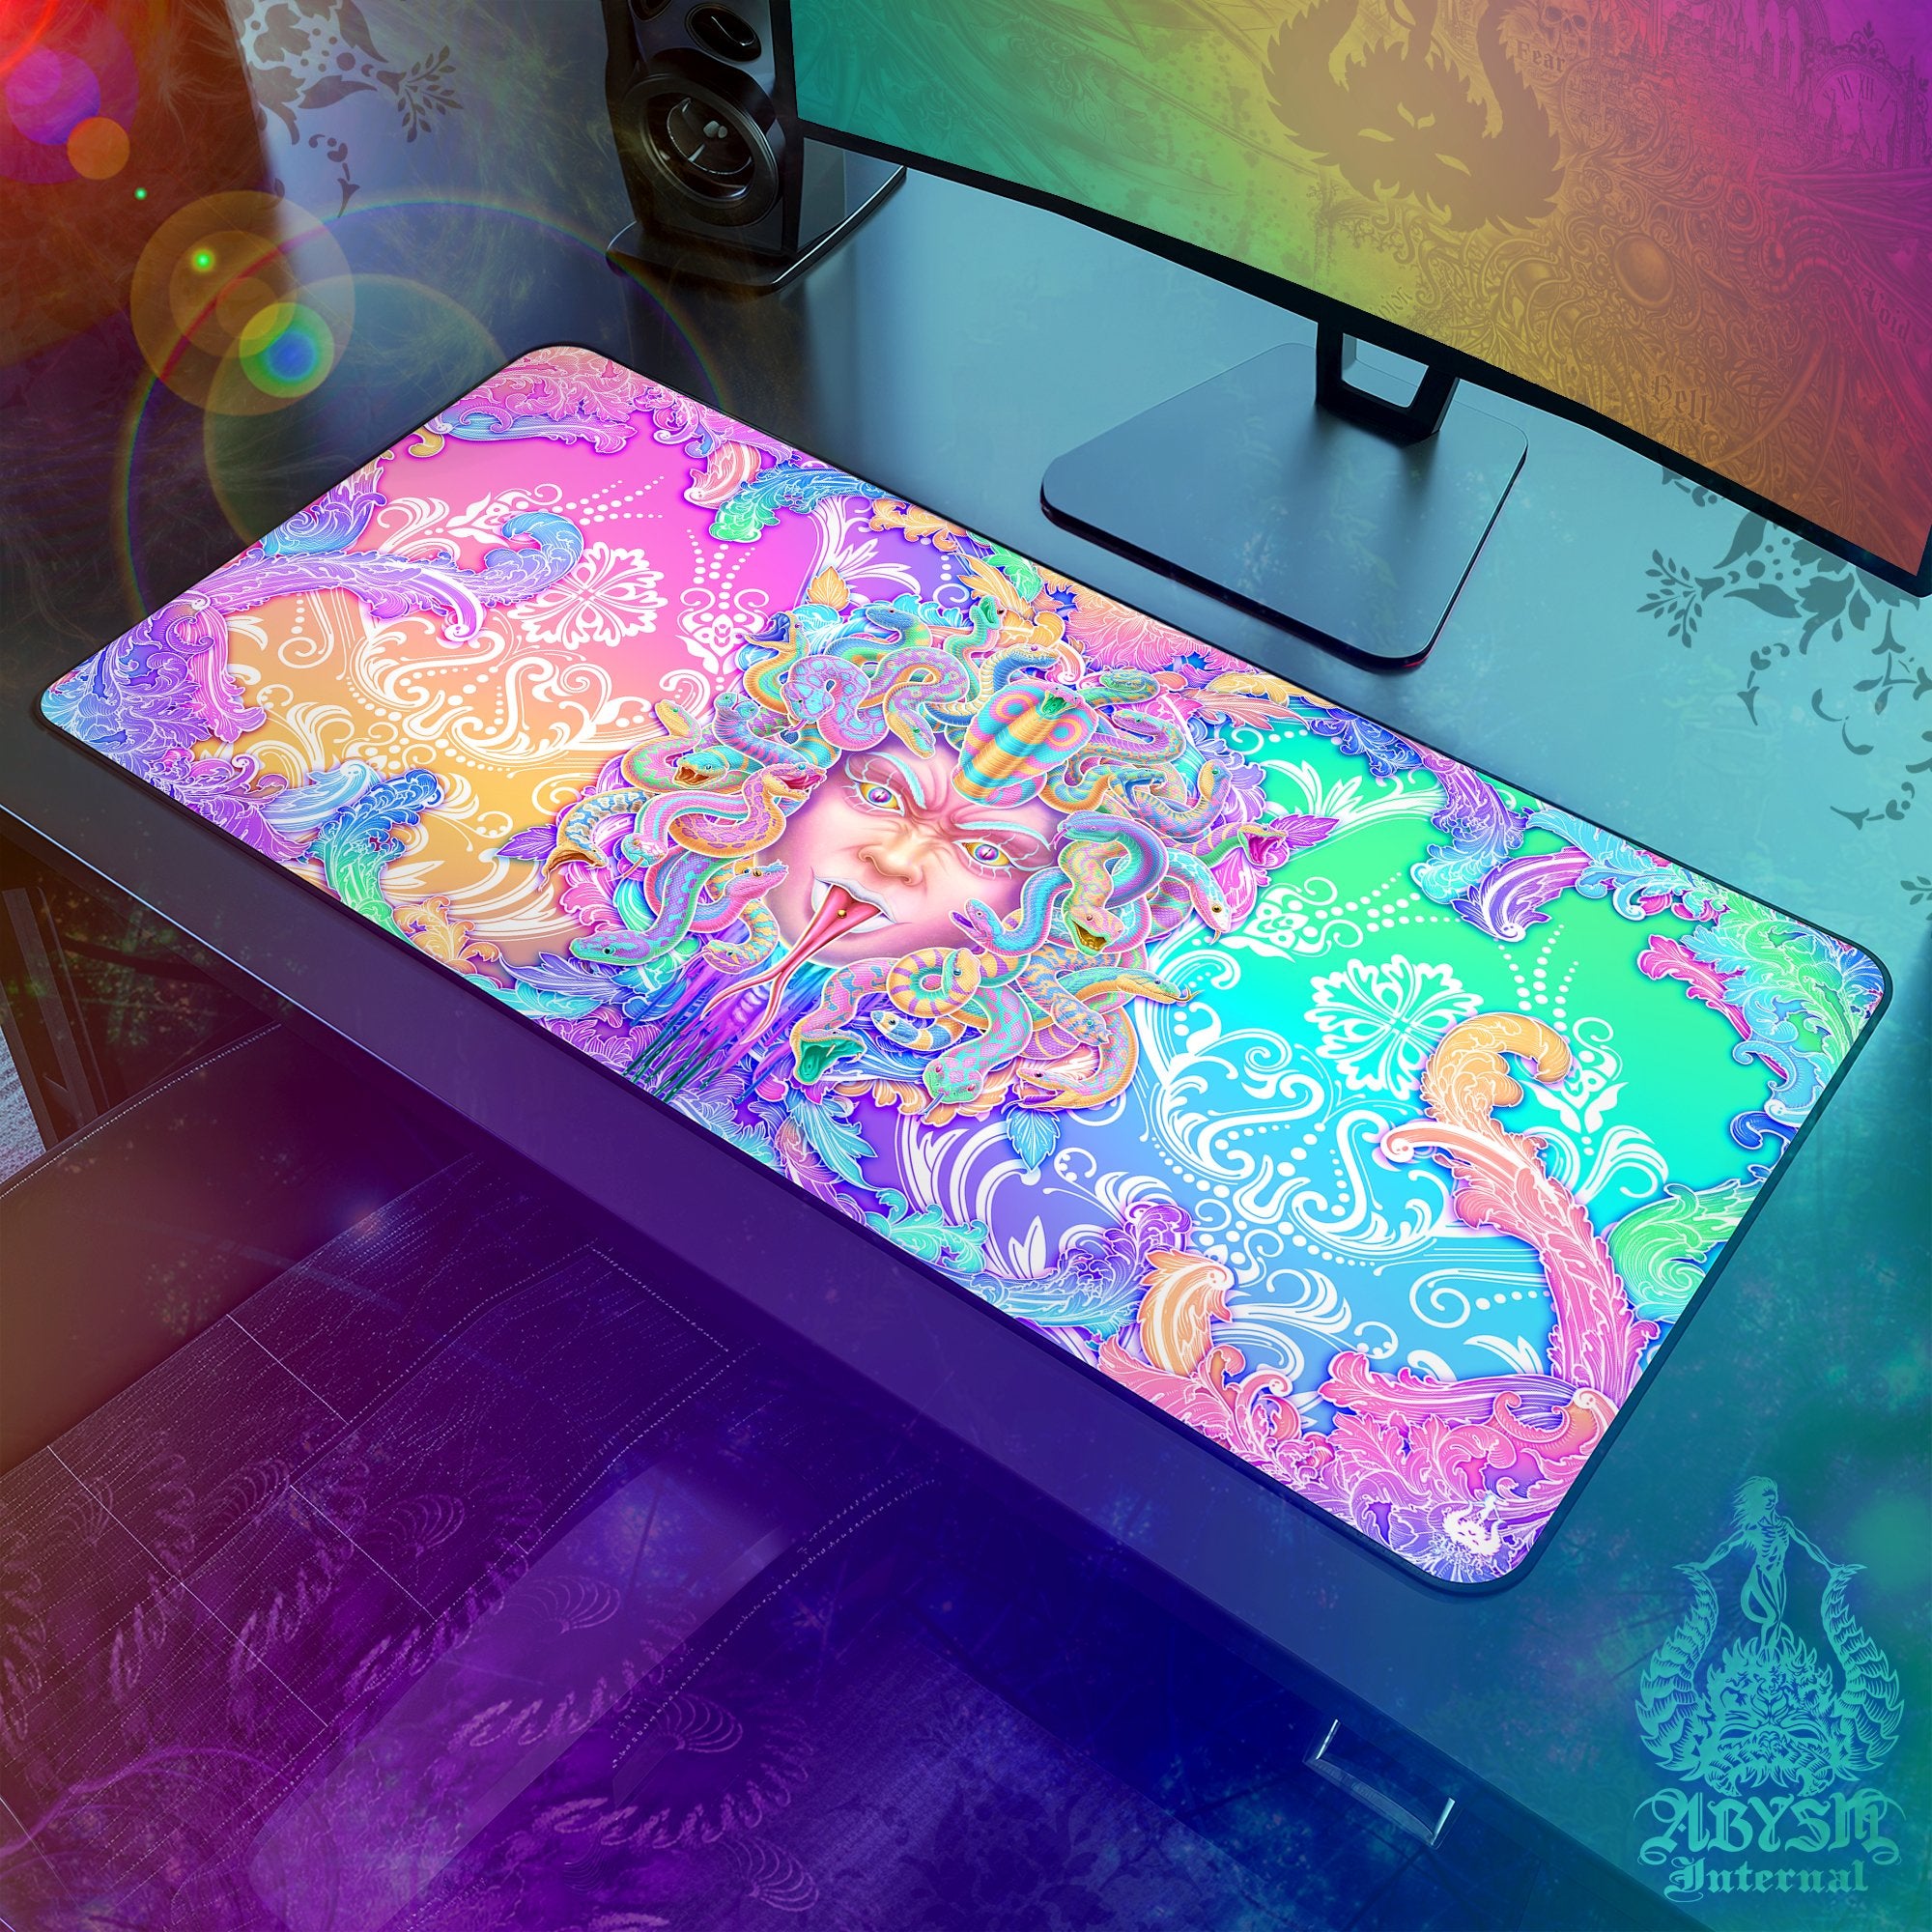 Colorful Gaming Desk Mat, Girl Gamer Mouse Pad, Psychedelic Pastel Table Protector Cover, Aesthetic, Medusa Skull Workpad, Fantasy Art Print - 4 Options - Abysm Internal